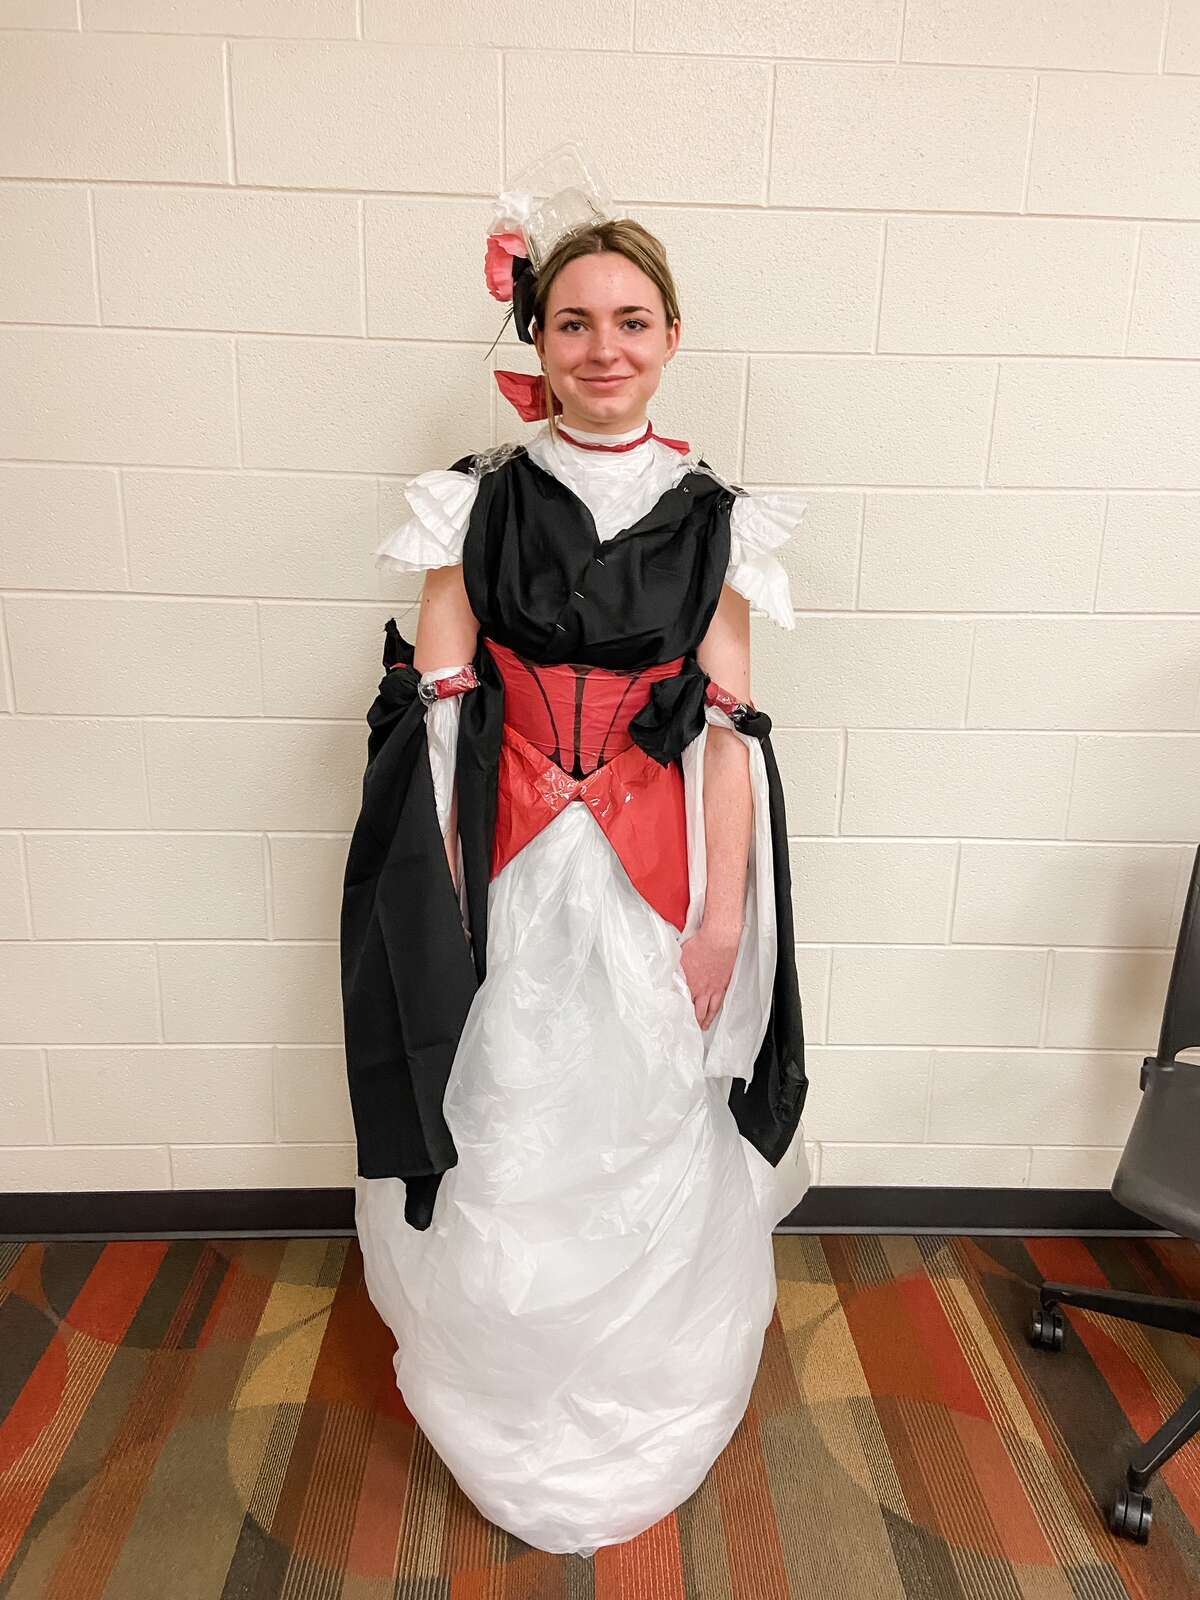 Big Rapids students Corbin Richeson, Paisley Prosser and Abbie Strasser participated and made a fashion statement by transforming different textiles and trash items into a wearable dress.